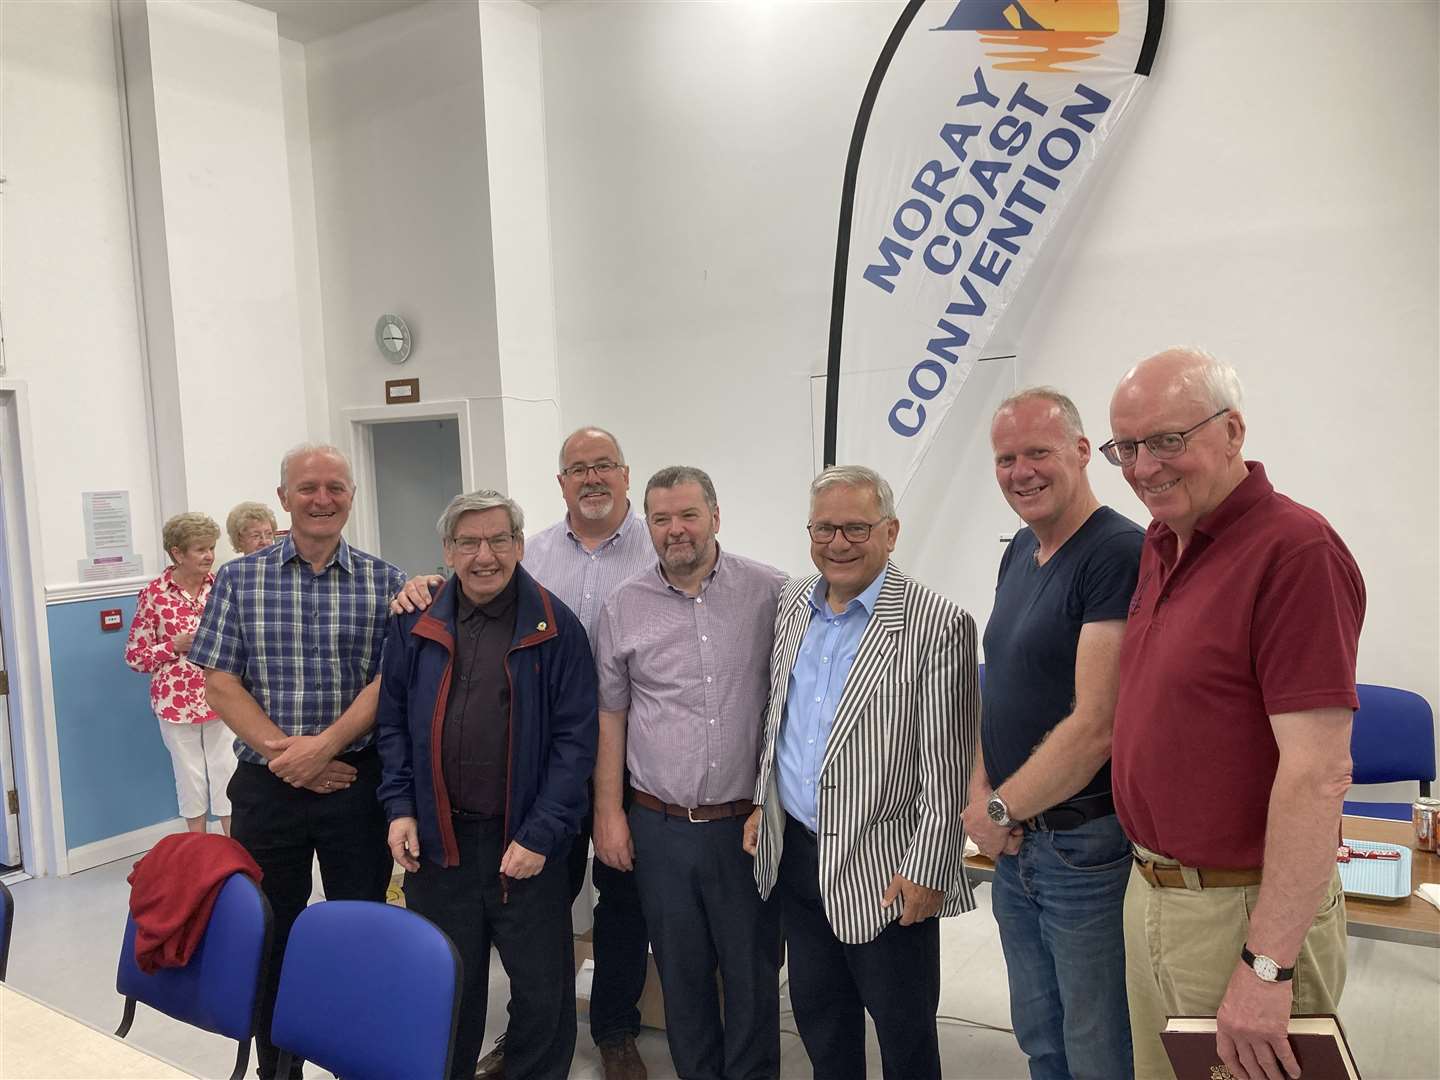 Moray Coast Convention chairman Bill Mowat (third left), and guest speakers Roger Carswell (third right) and Rev Dr Colin Dow (second right) are joined by committee members (from left) Alex Bain, Graeme Thain, Rev Graham Swanson and John Matheson. Picture: Moray Coast Convention